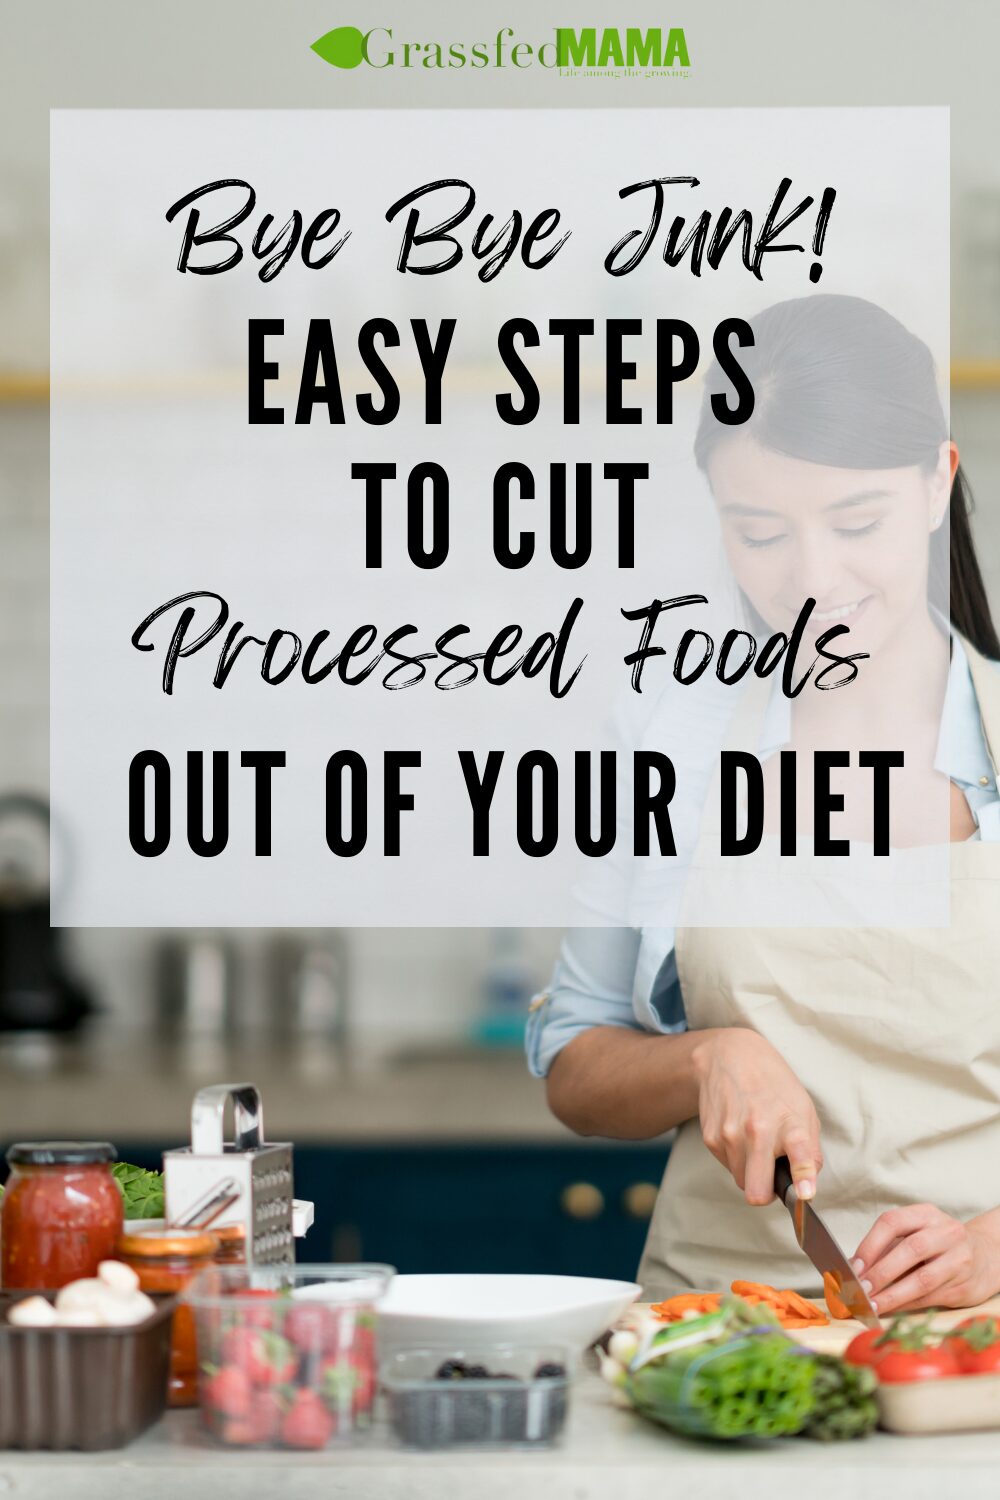 Easy Steps to Cut Processed Foods out of your diet